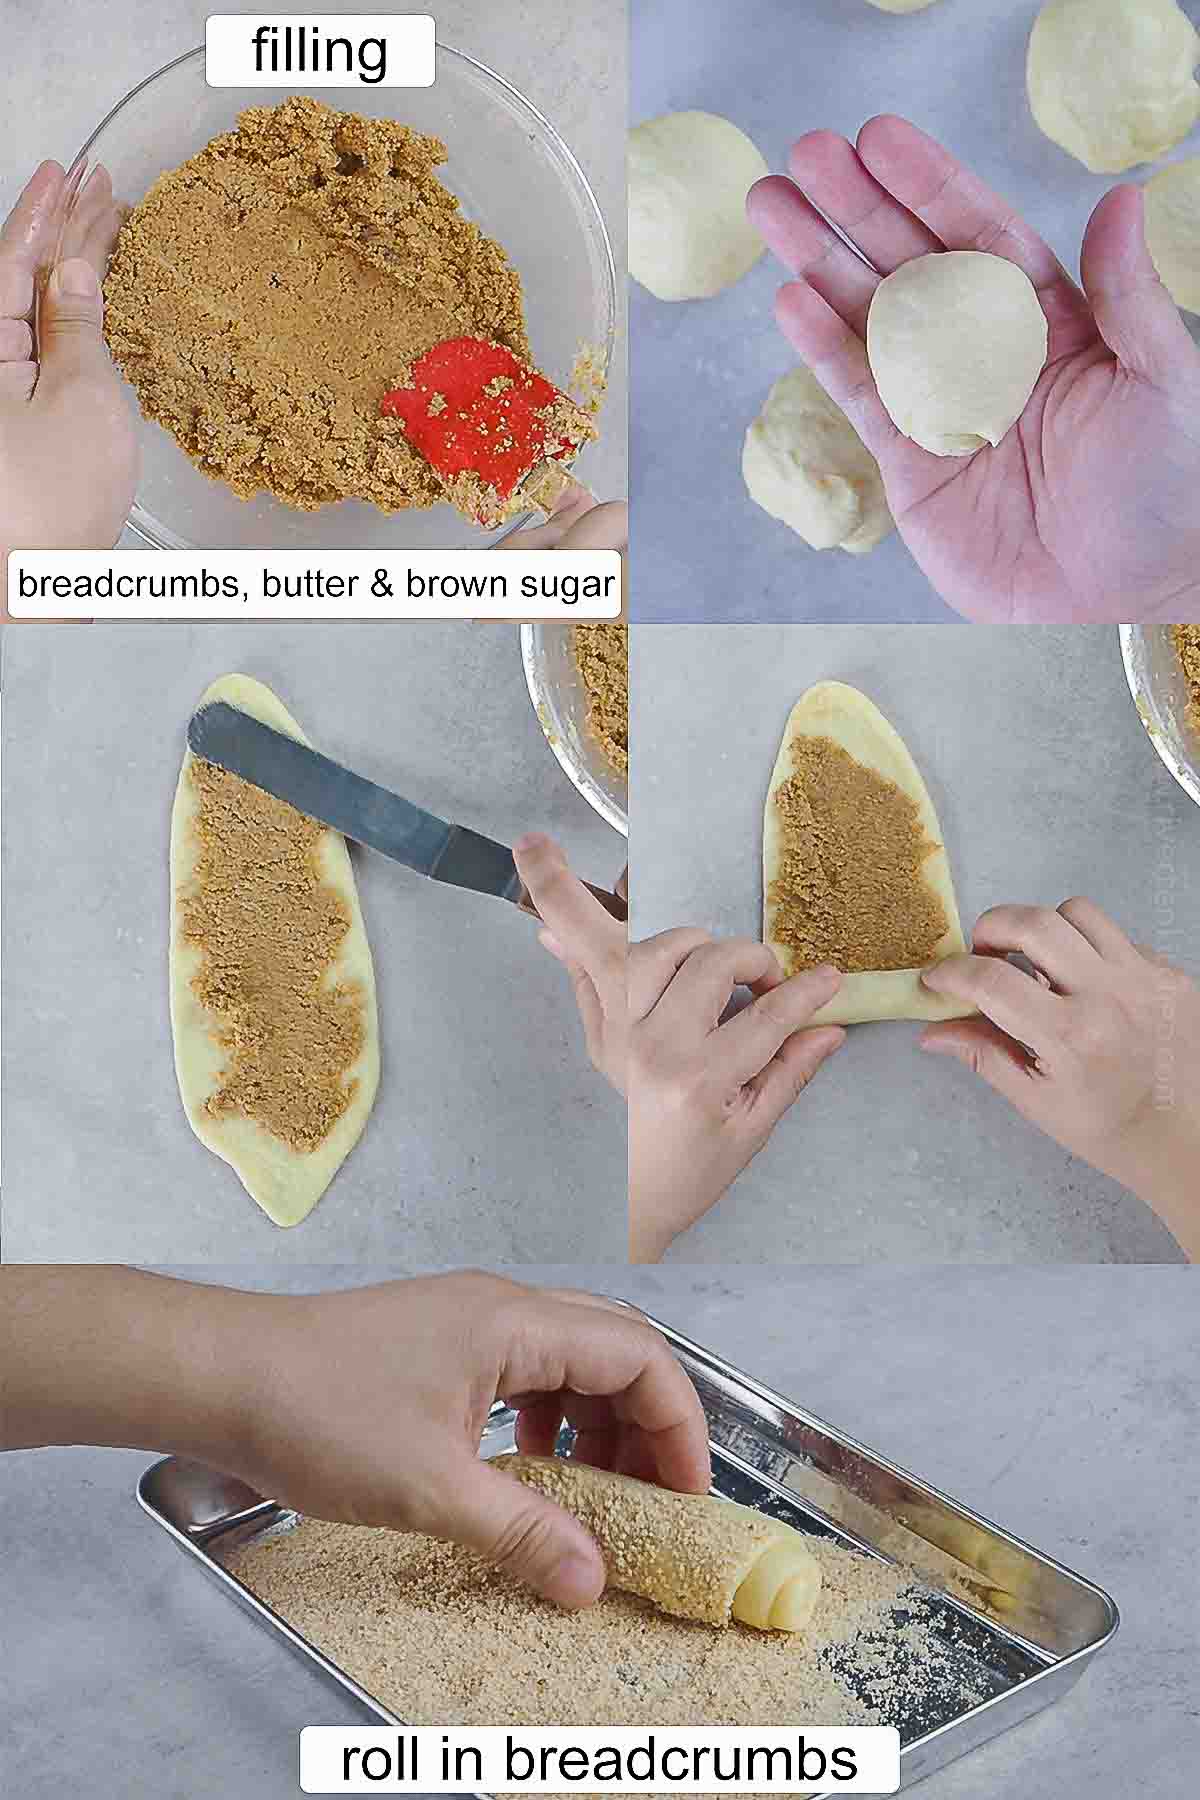 process on how to fill Spanish bread dough with brown sugar, breadcrumbs and butter.